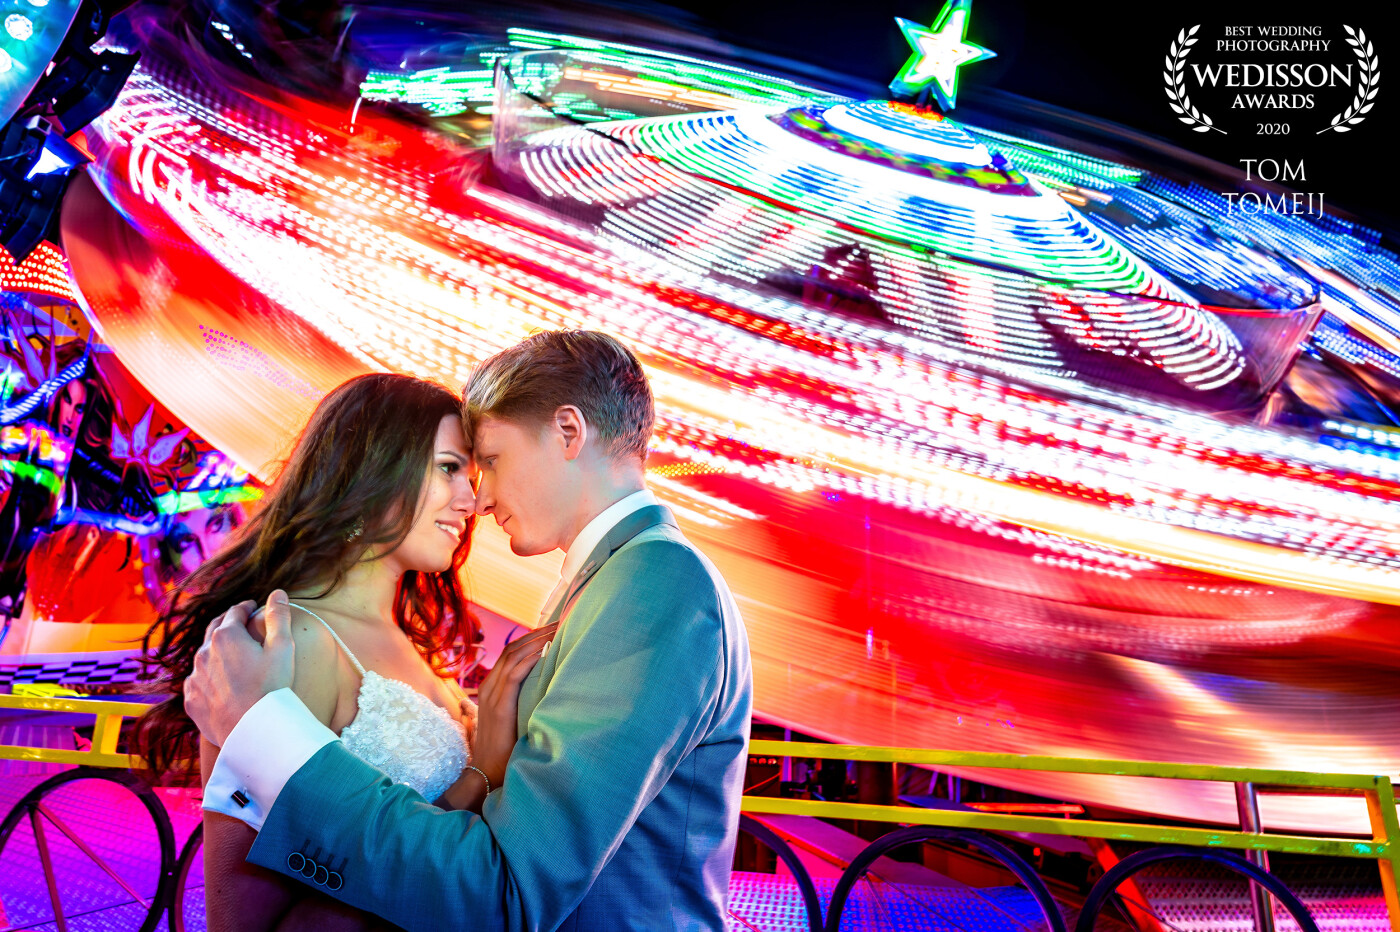 A photoshoot at a funfair was their wish. Of course for us, photographers, plenty of decor for exclusive wedding photography.  Besides, that was a lot of fun...We did all sorts of attractions and laughed out loud. I would love to come back sometimes!